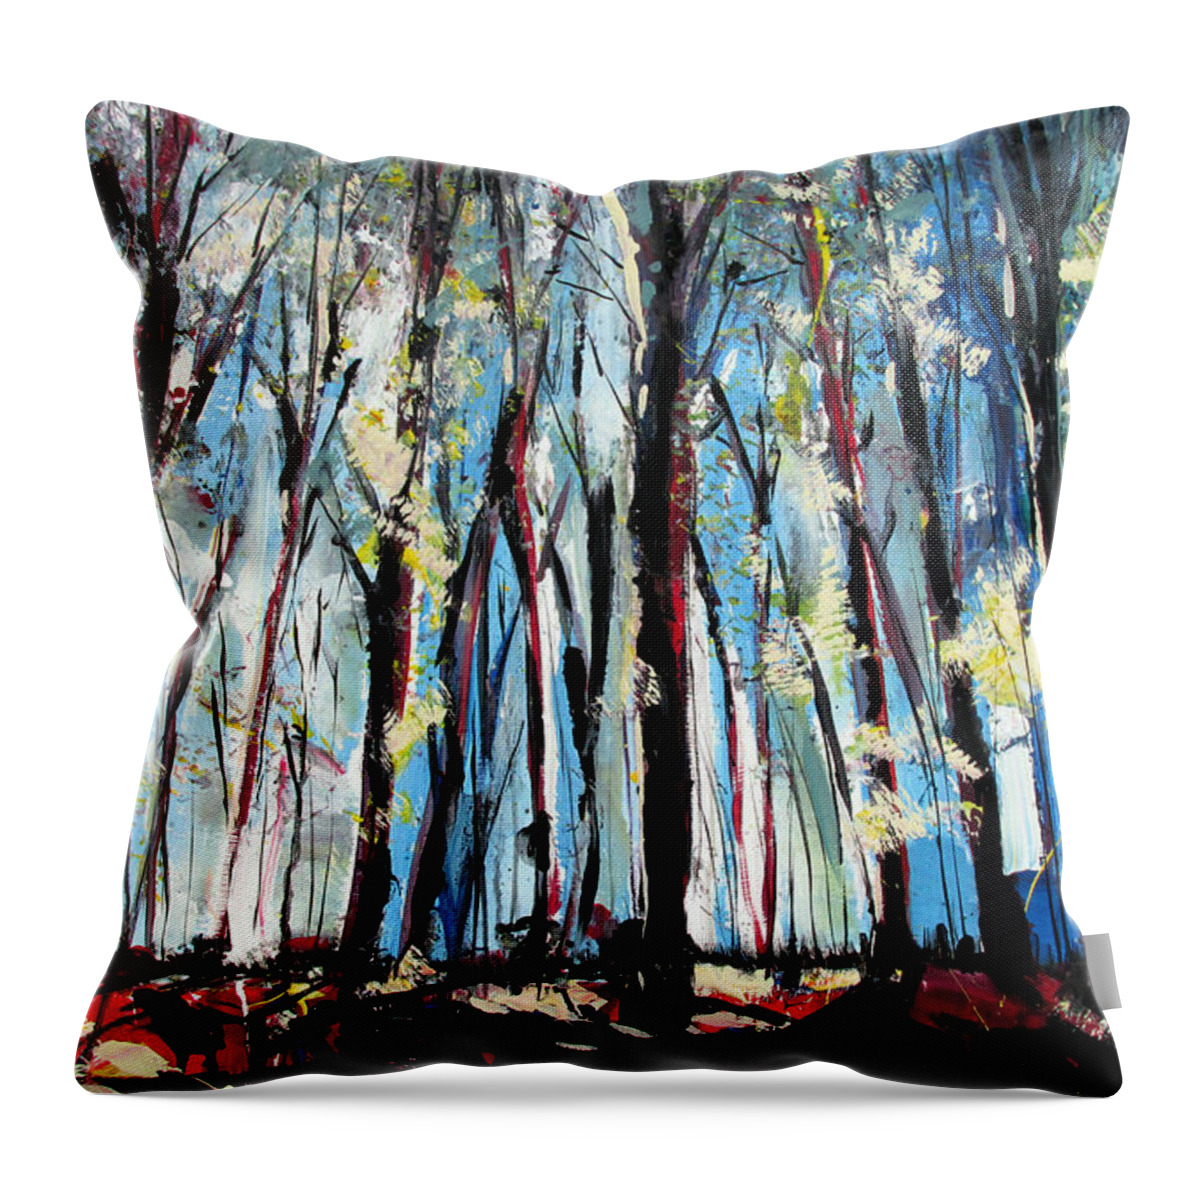 John Gholson Throw Pillow featuring the painting Mind Through The Trees And In The Clouds by John Gholson